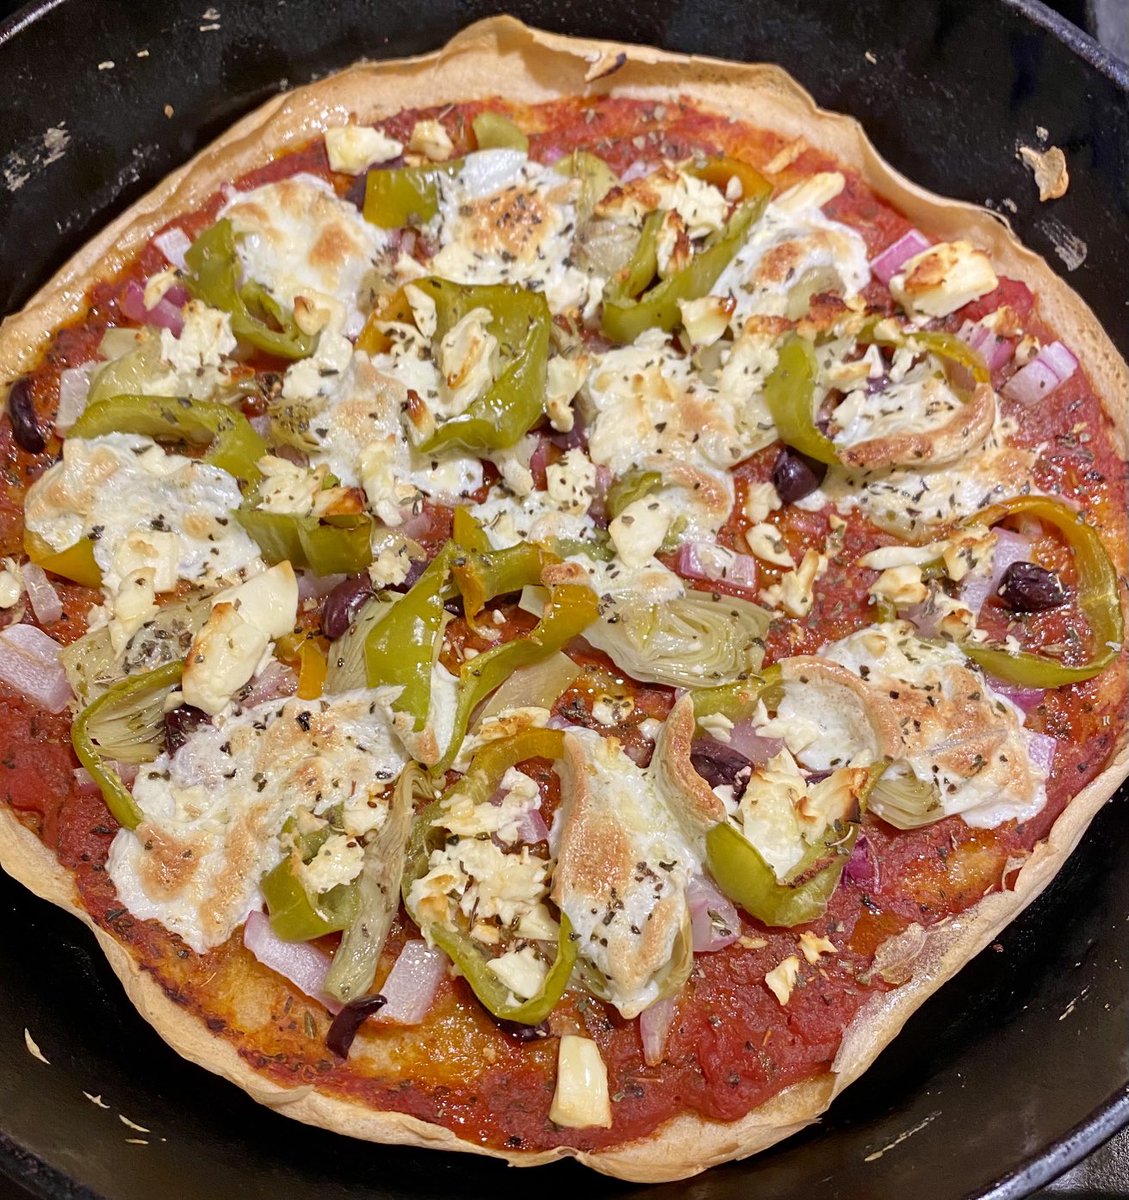 Cast Iron Sourdough Discard Pizza tonite! Going Greek with Mozzarella, Feta, Kalamata Olives, homegrown Peppers, Red Onion and Artichoke Hearts. Pizza!!! 🍕